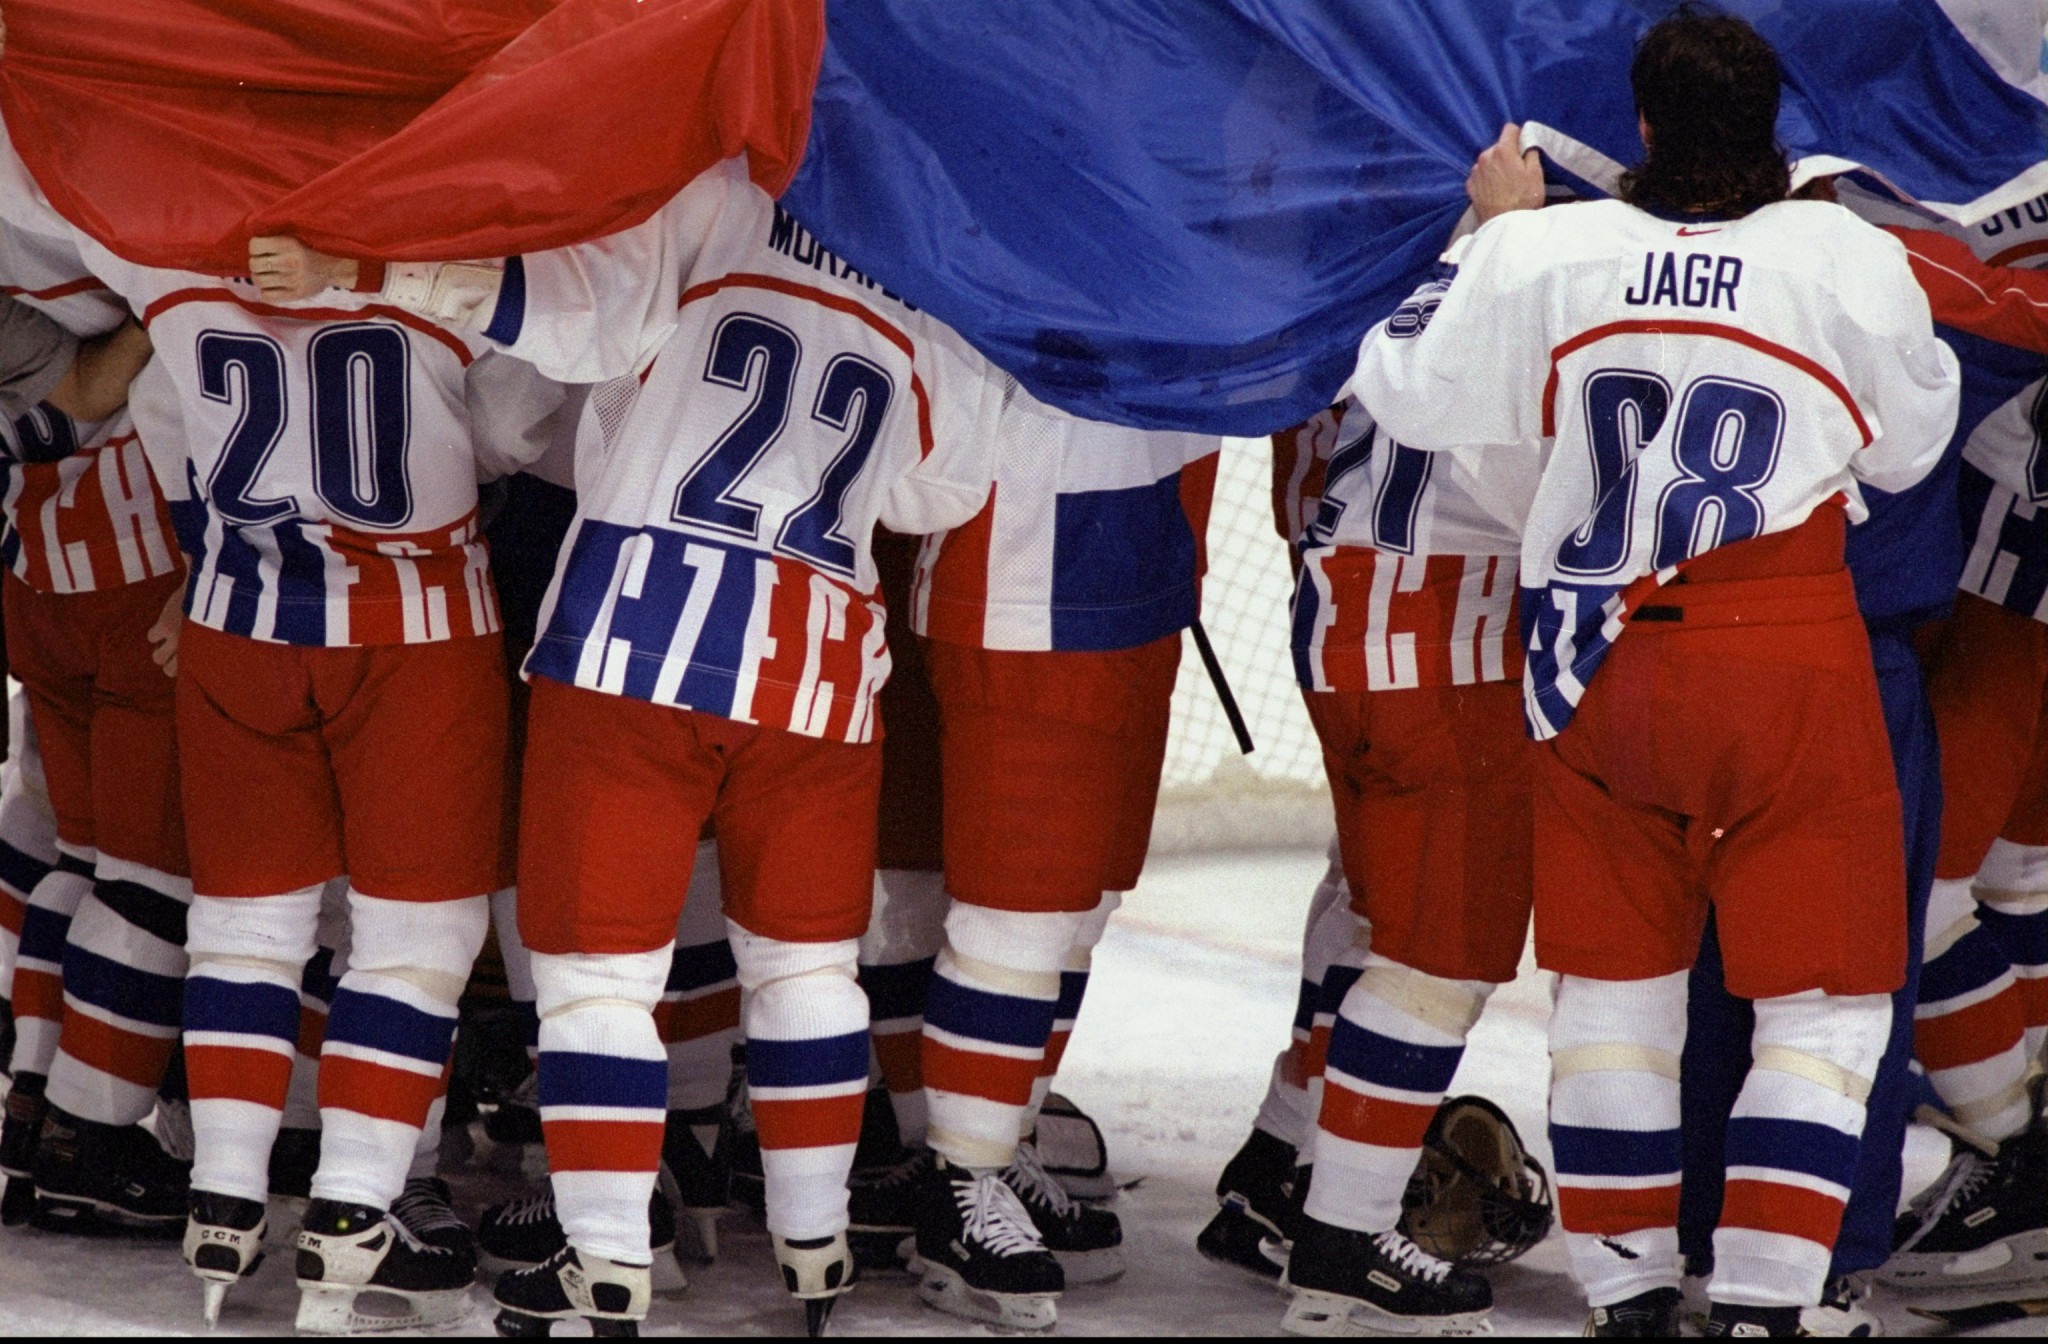 Jaromír Jágr was part of the Czech Republic team that surprisingly won the Olympic gold medal at Nagano 1998, the first tournament NHL players were allowed to compete in ©Getty Images